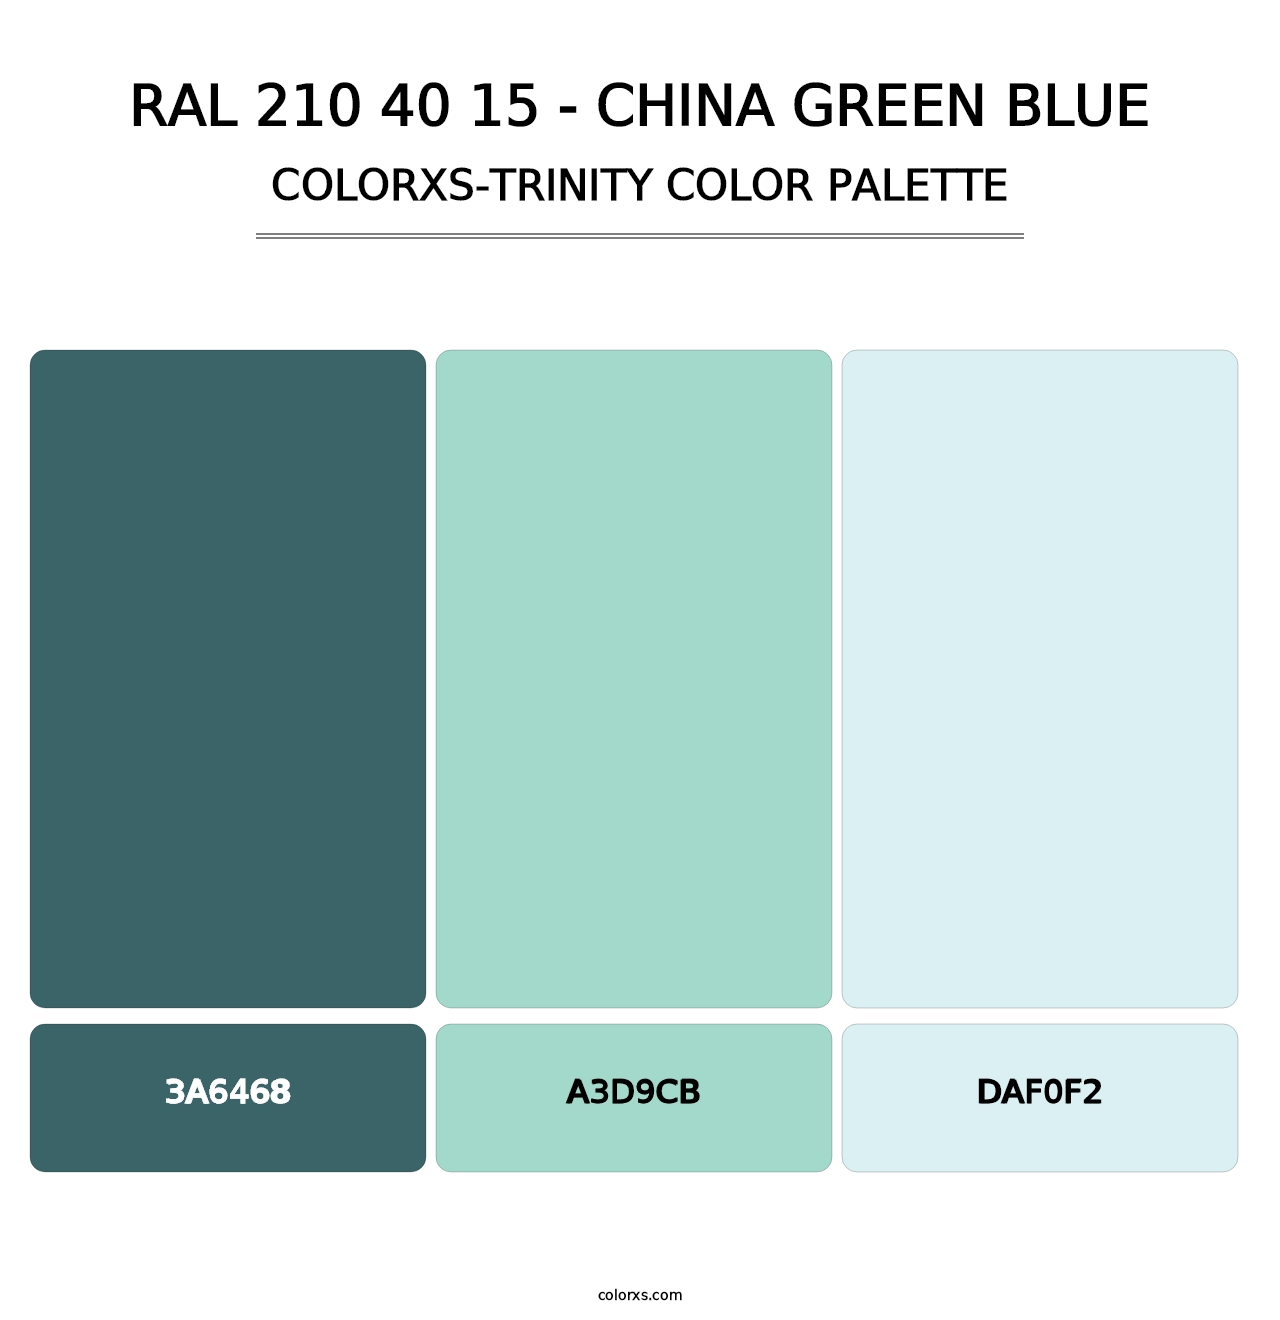 RAL 210 40 15 - China Green Blue - Colorxs Trinity Palette